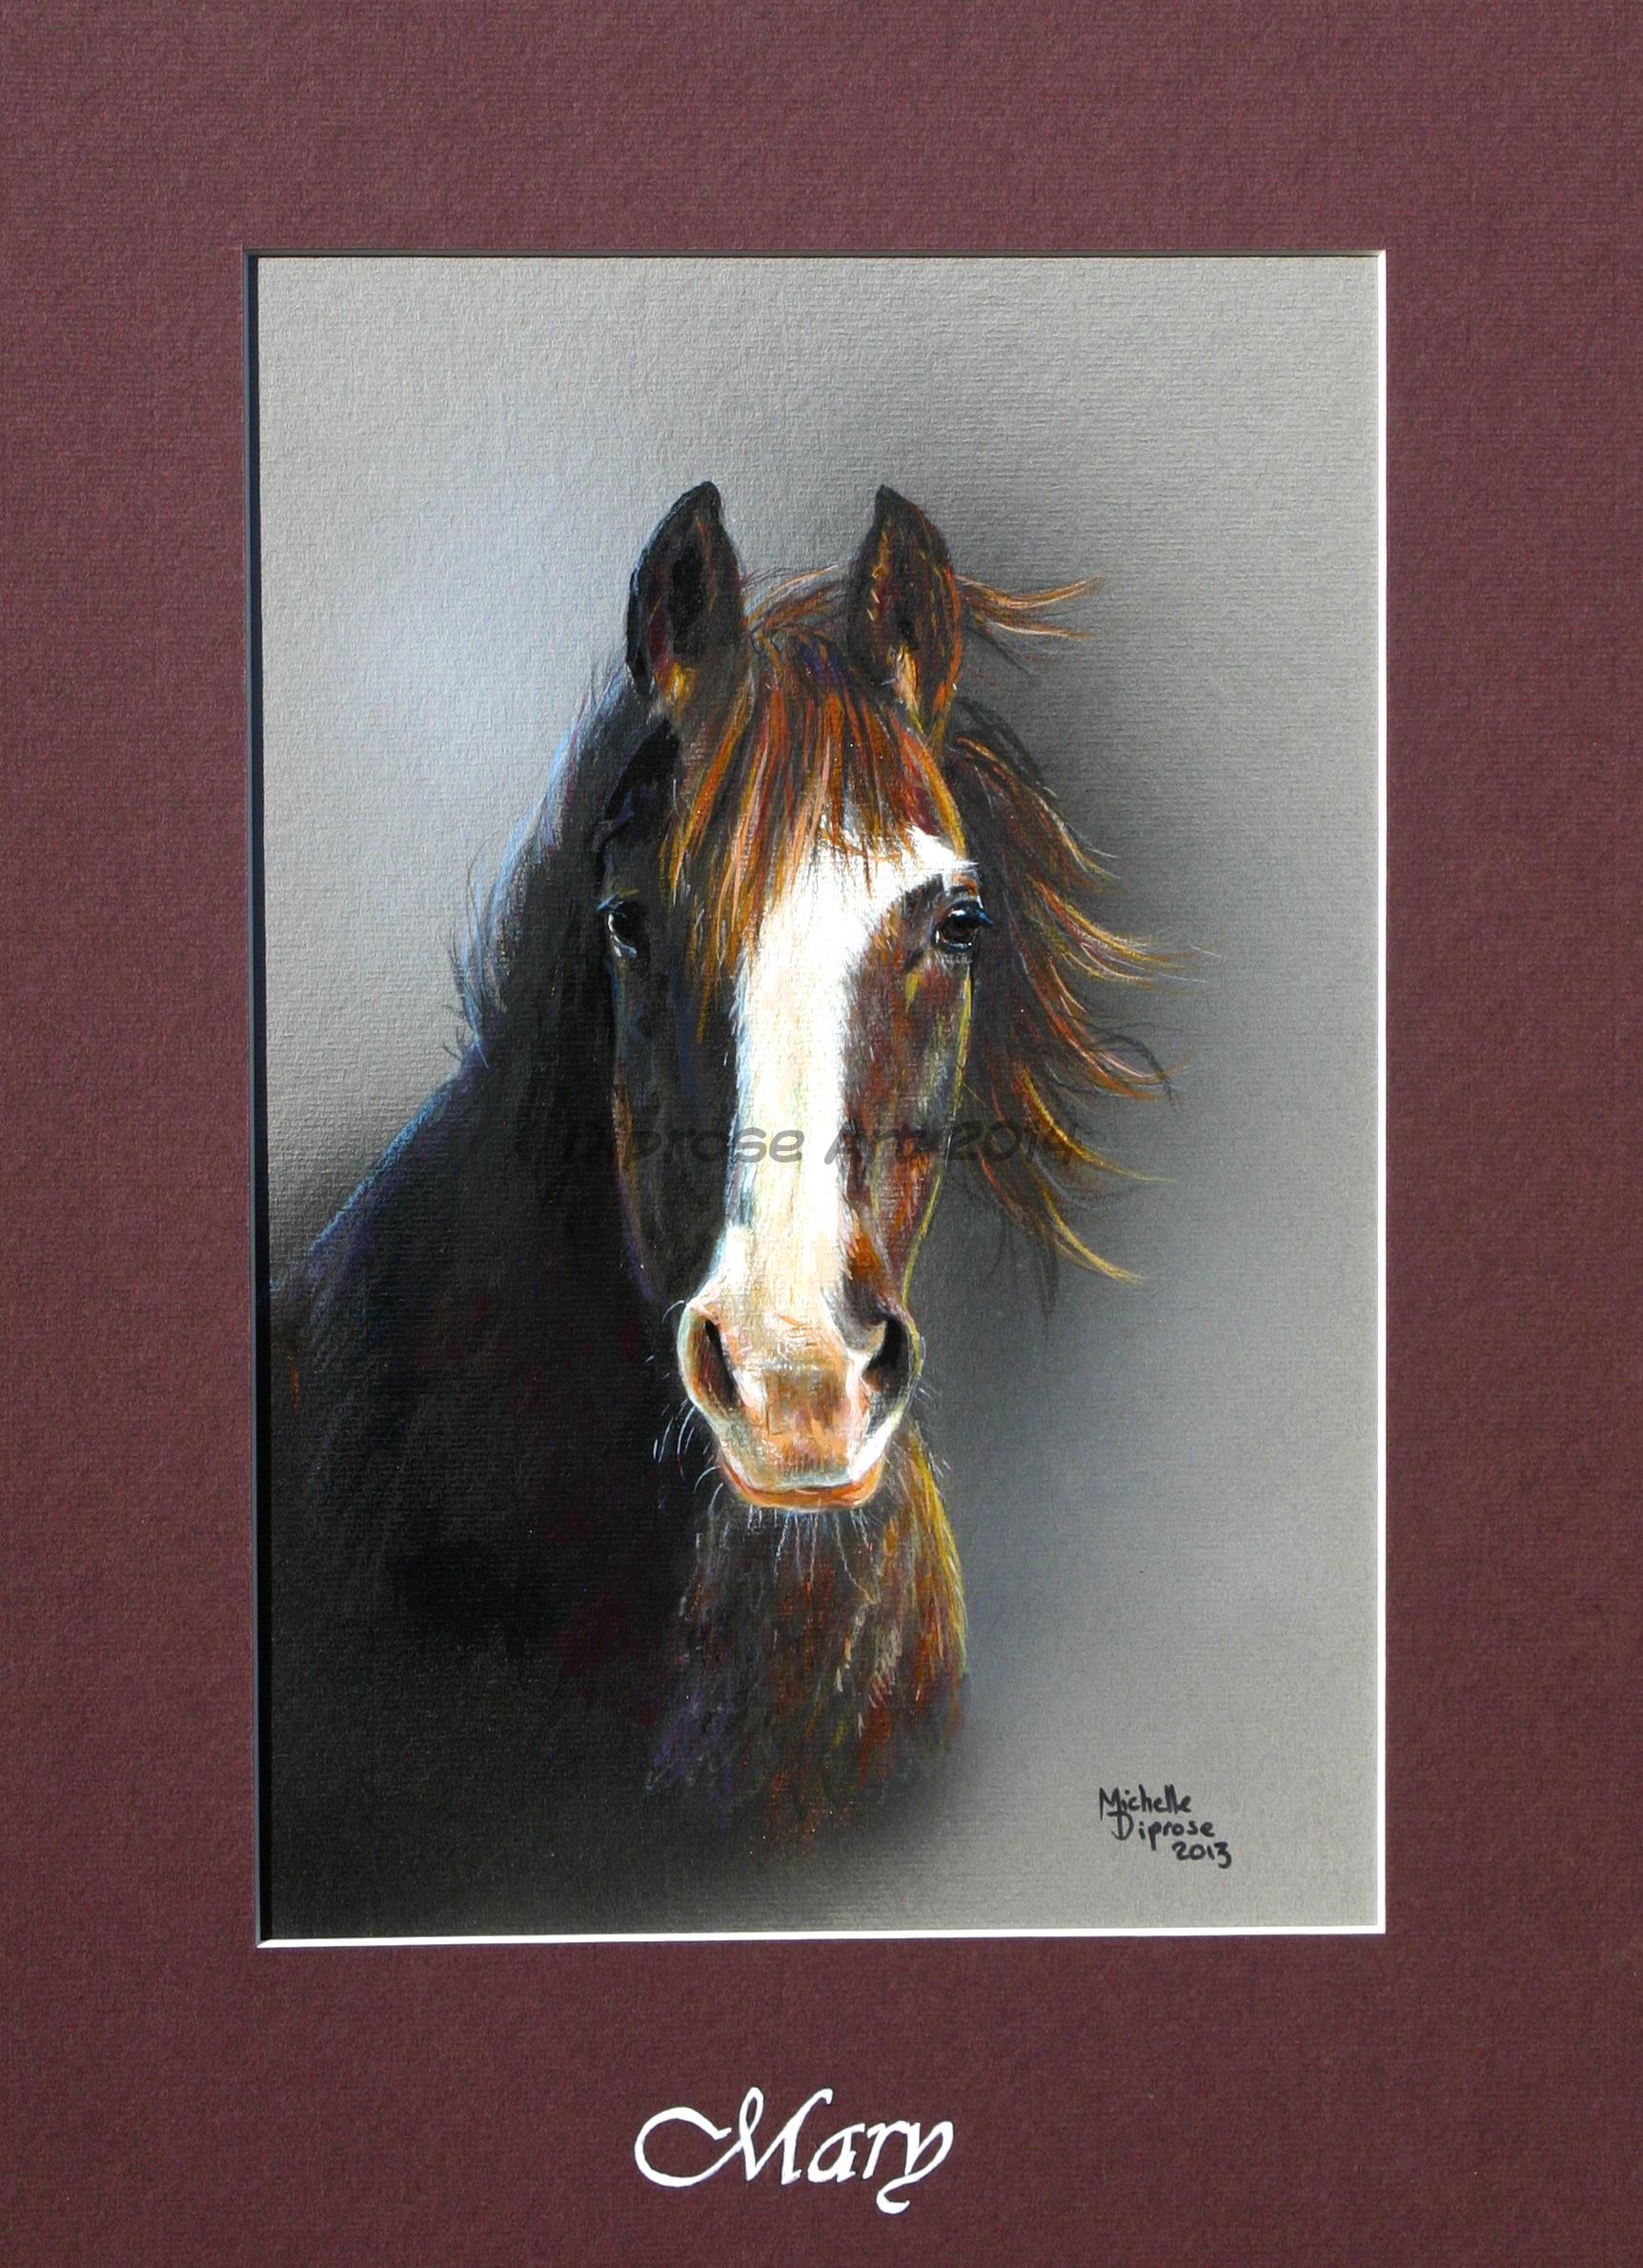 Acrylics on board - approx A4 -  horse portrait - Mary was a very dear old mare and belonged to a friend of mine.  She was black but had deep red copper highlights, and a soft gentle expression.